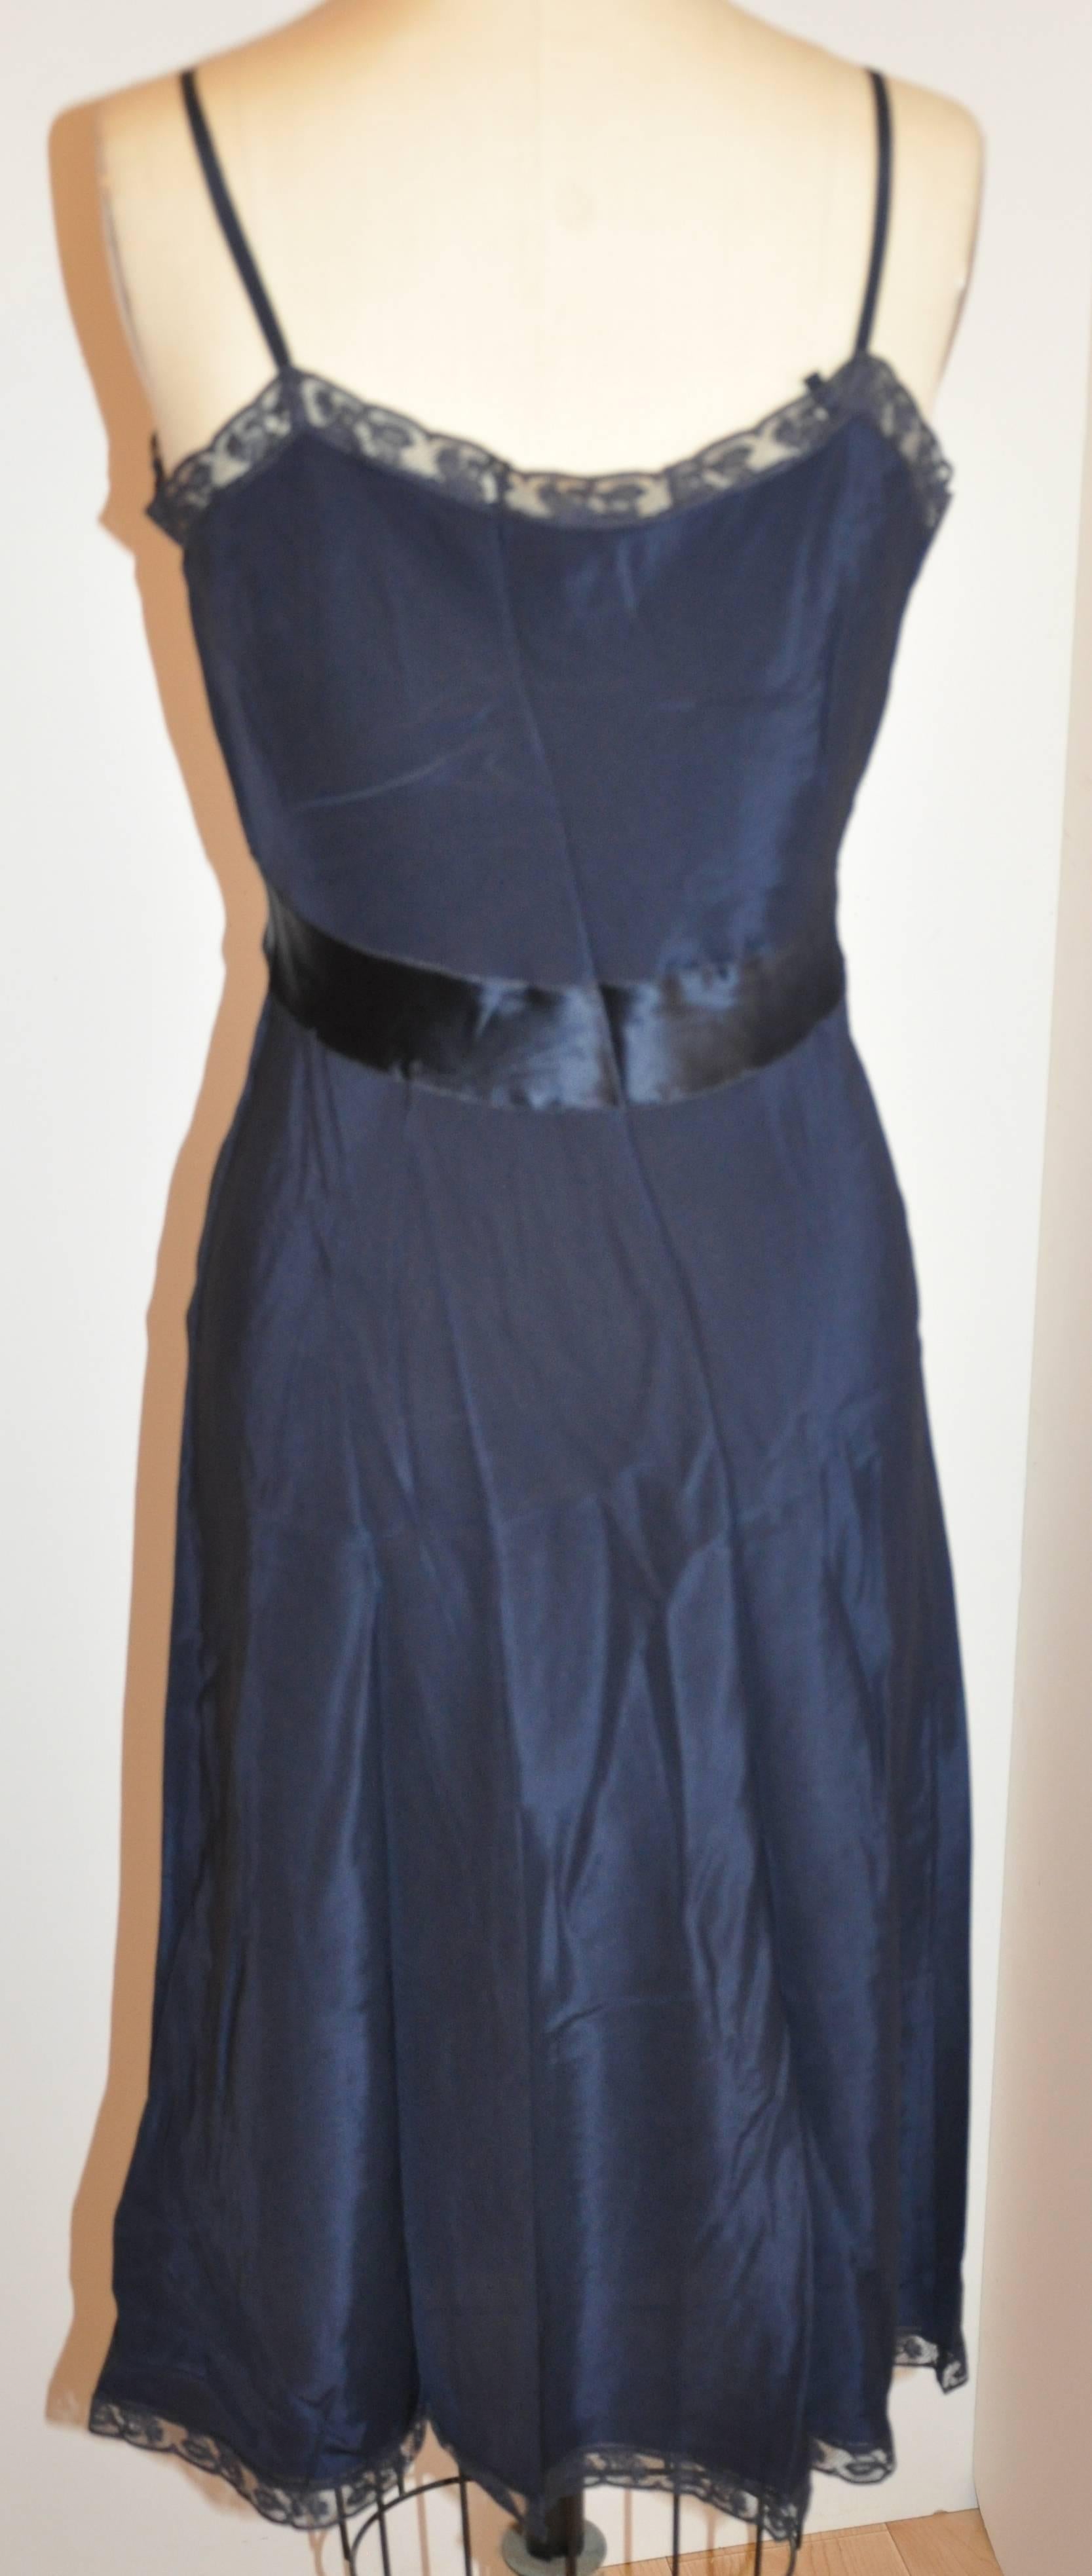 Black Midnight Blue Silk Embroidered with Lace Detailing Slip Dress